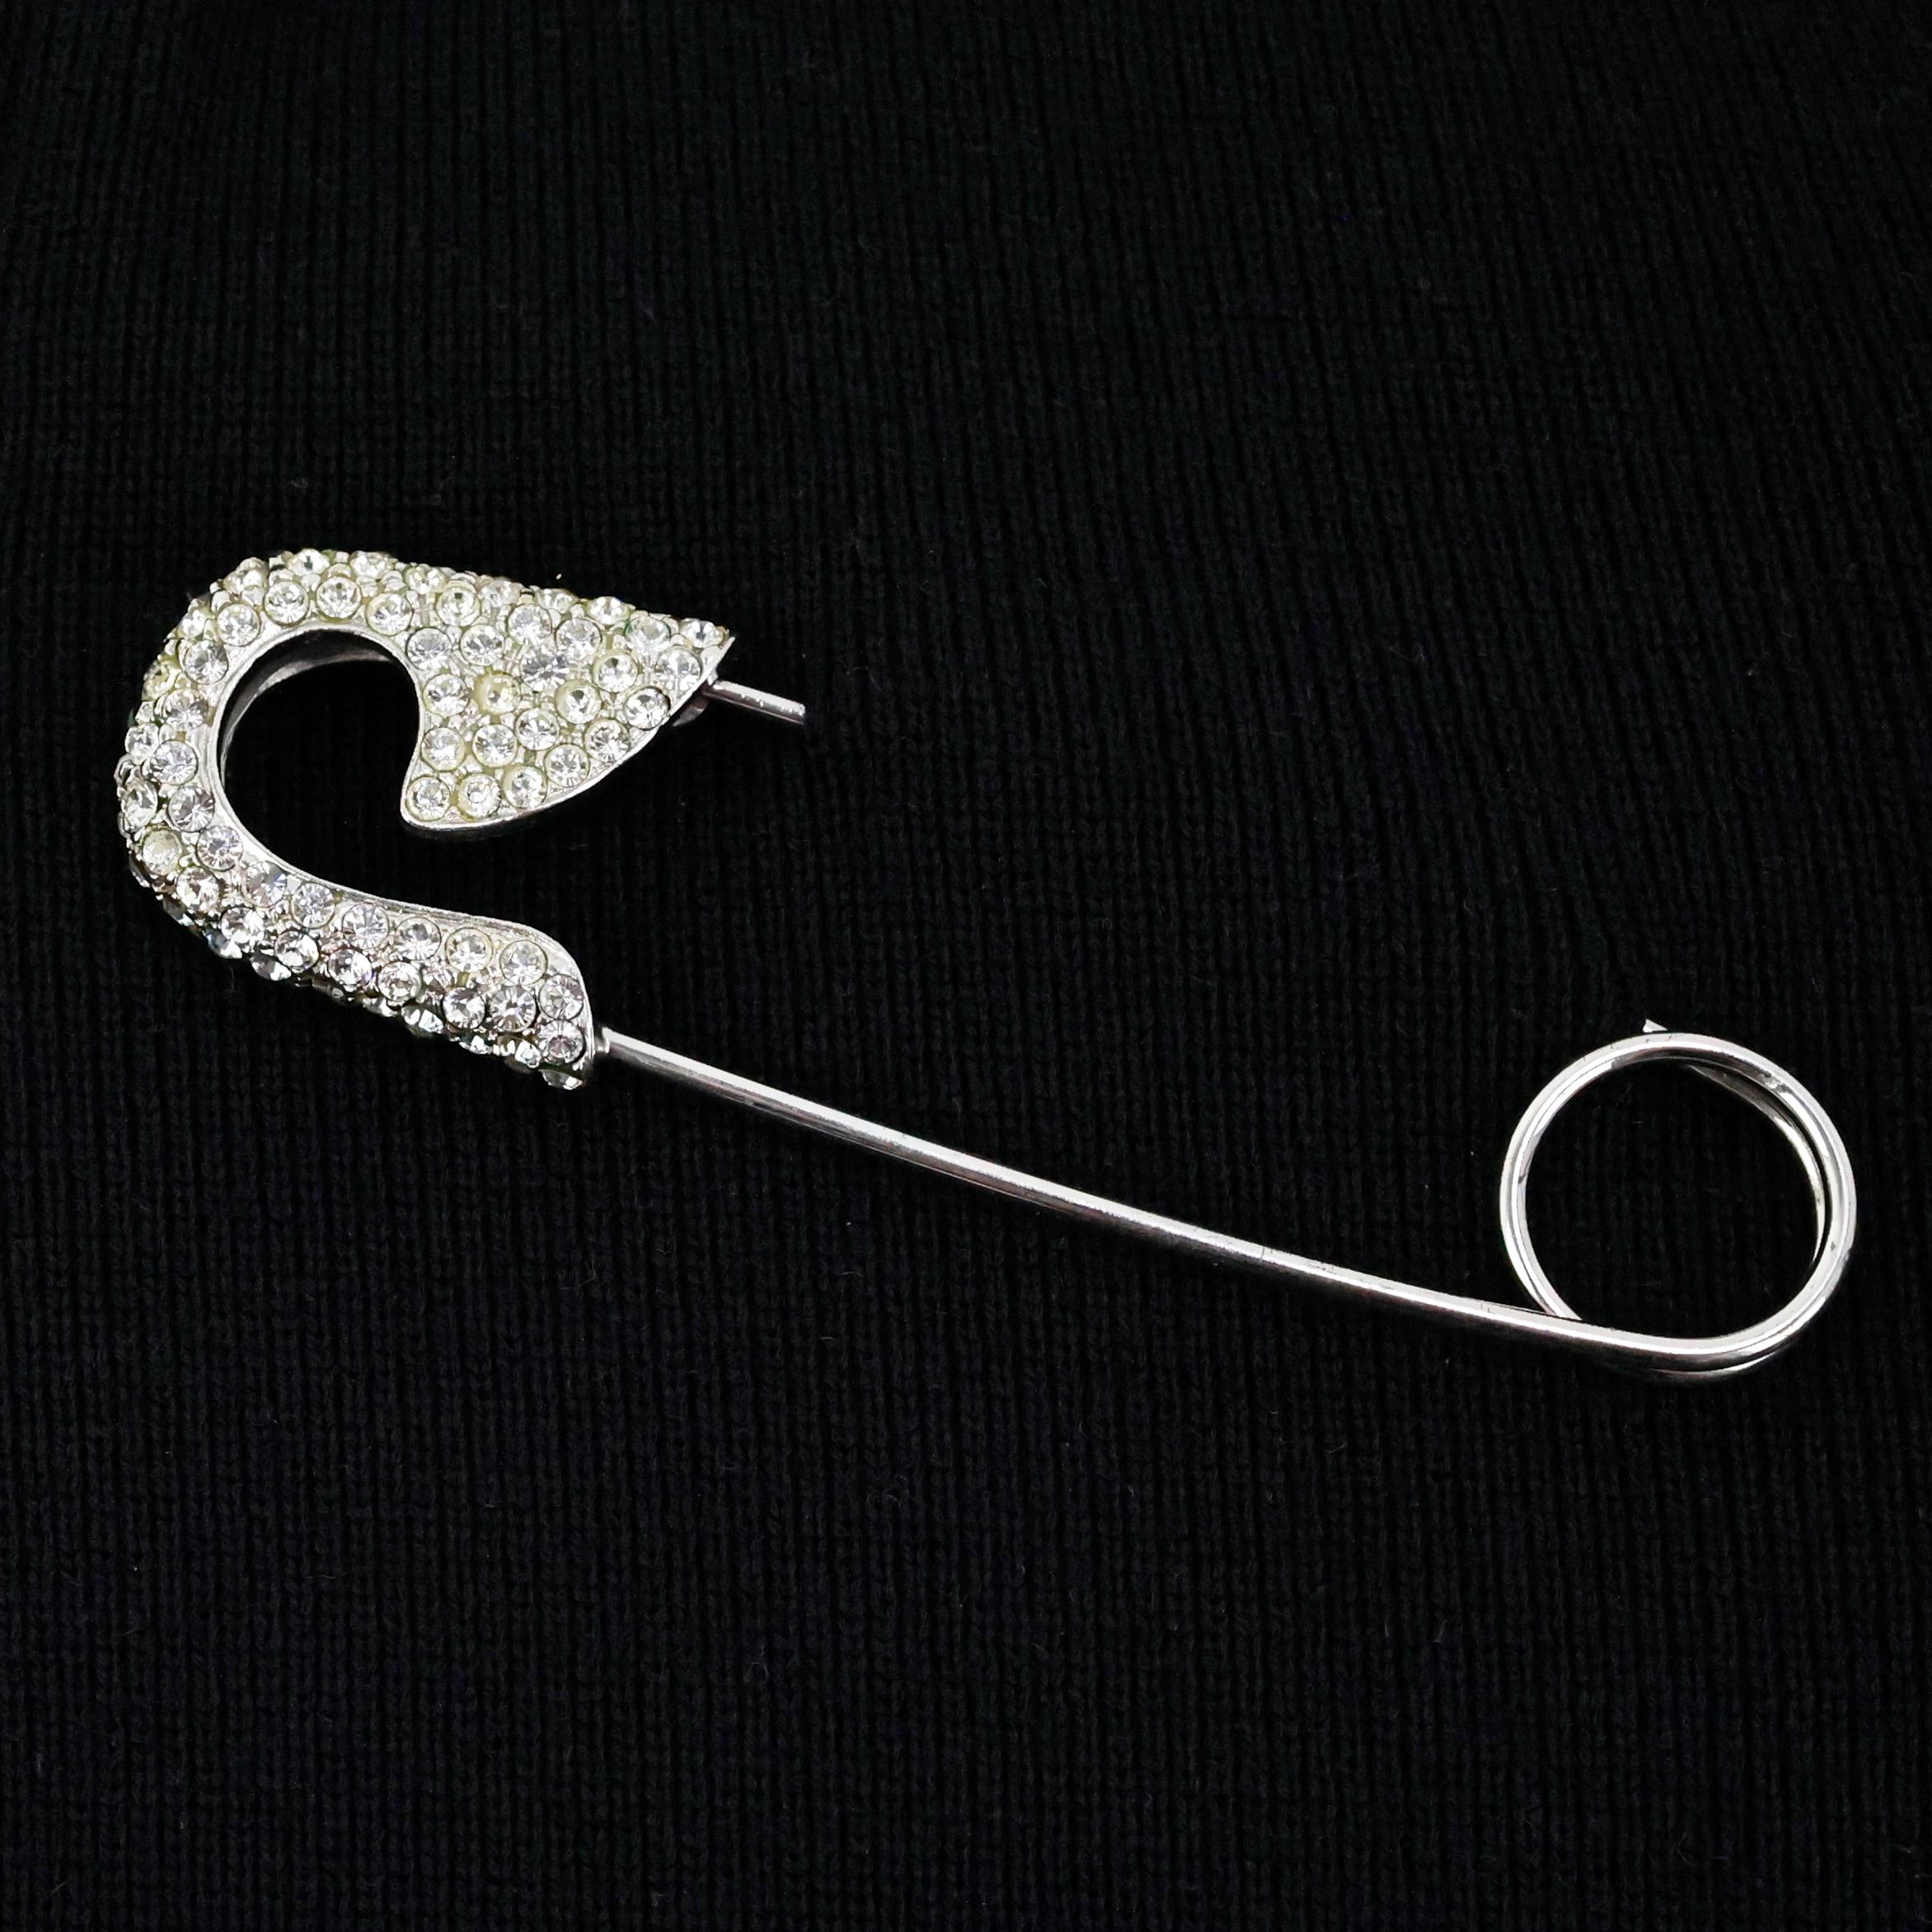 Christian Dior oversize crystal embellished safety pin brooche. 

Condition:
Really good.

Measurements:
Length: 11cm
Width: 3cm